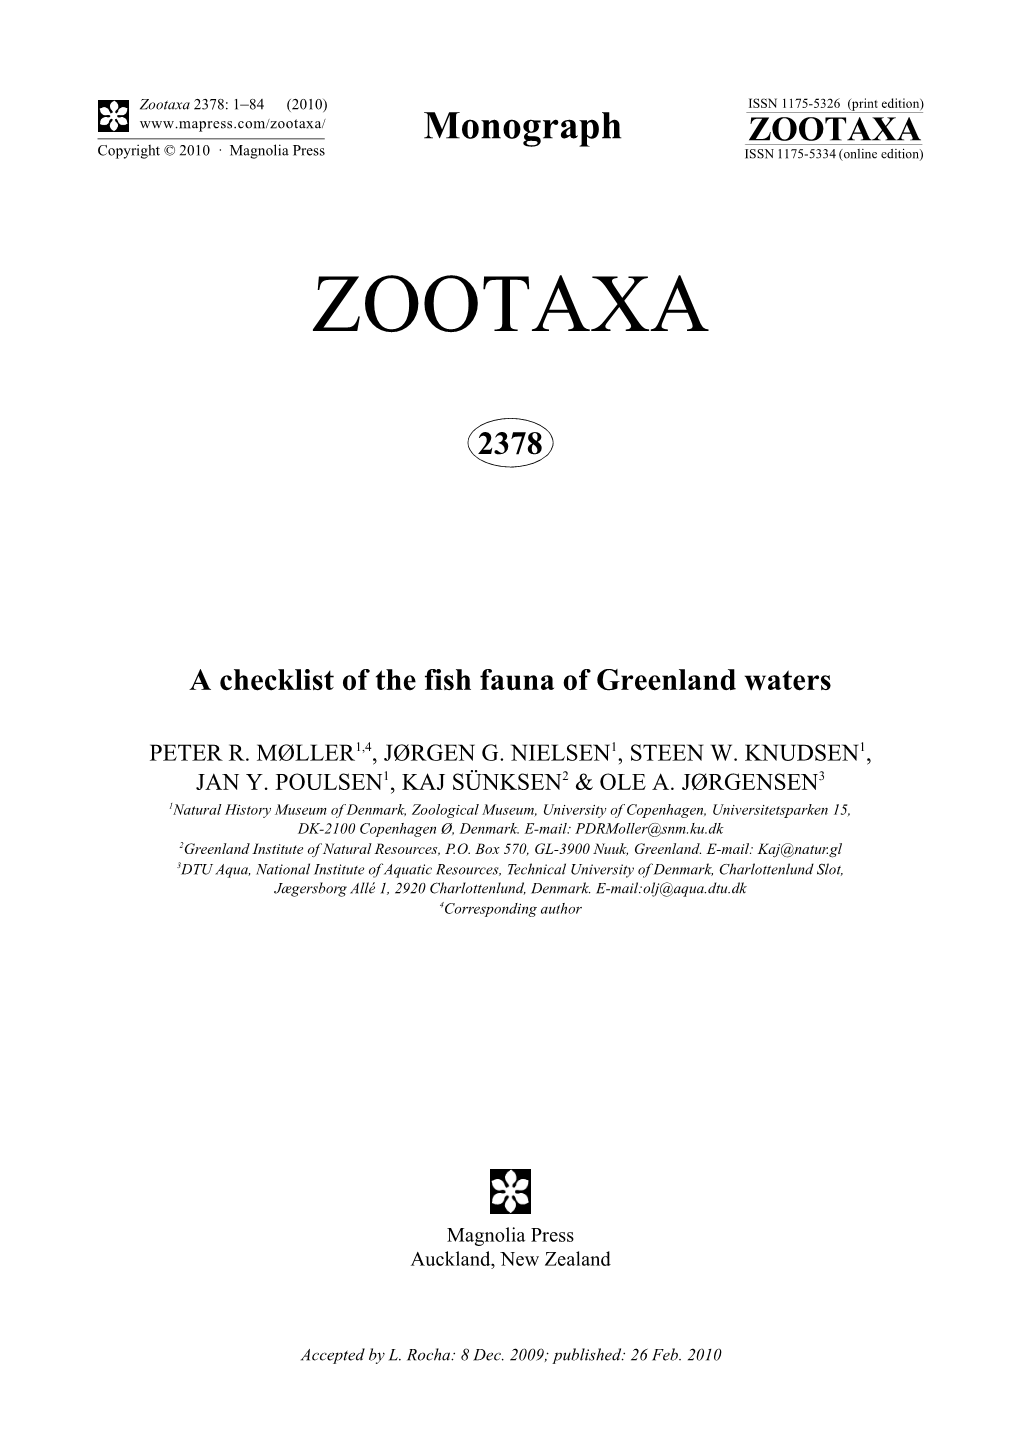 Zootaxa, a Checklist of the Fish Fauna of Greenland Waters